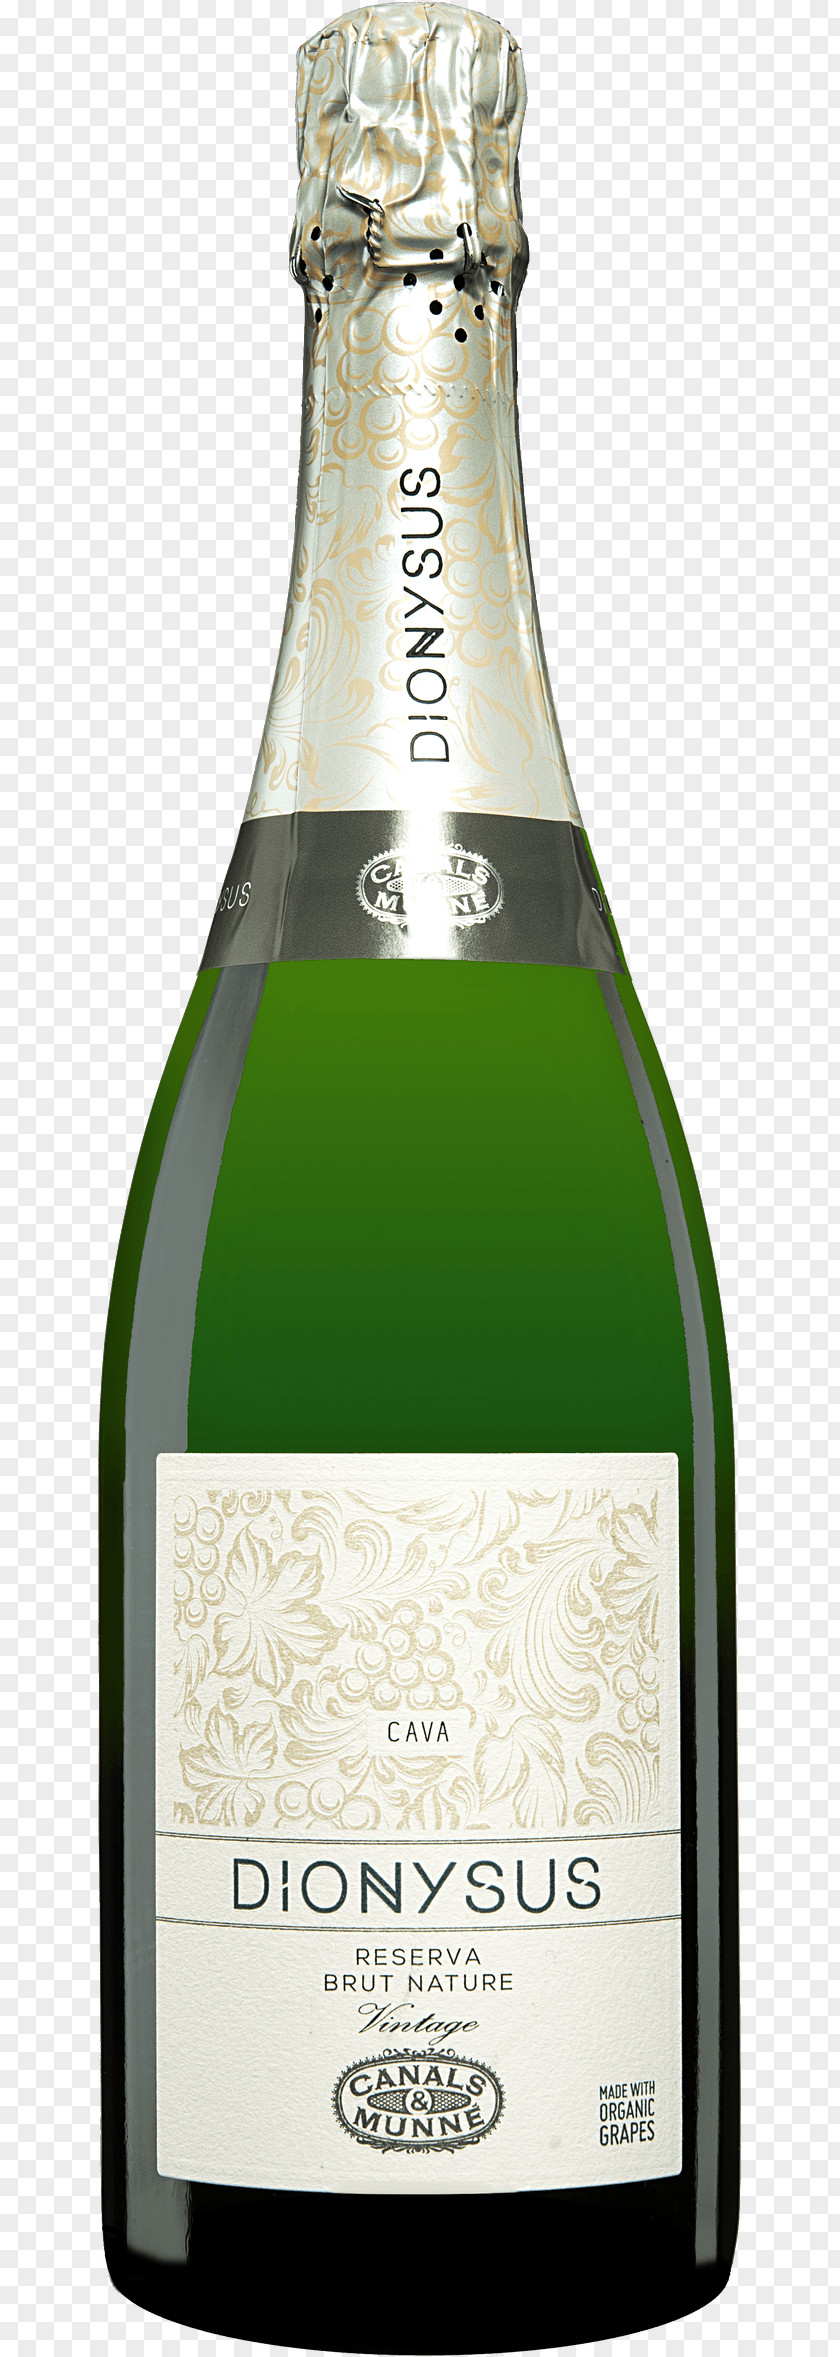 Champagne Global Wines Beer Bottle PNG